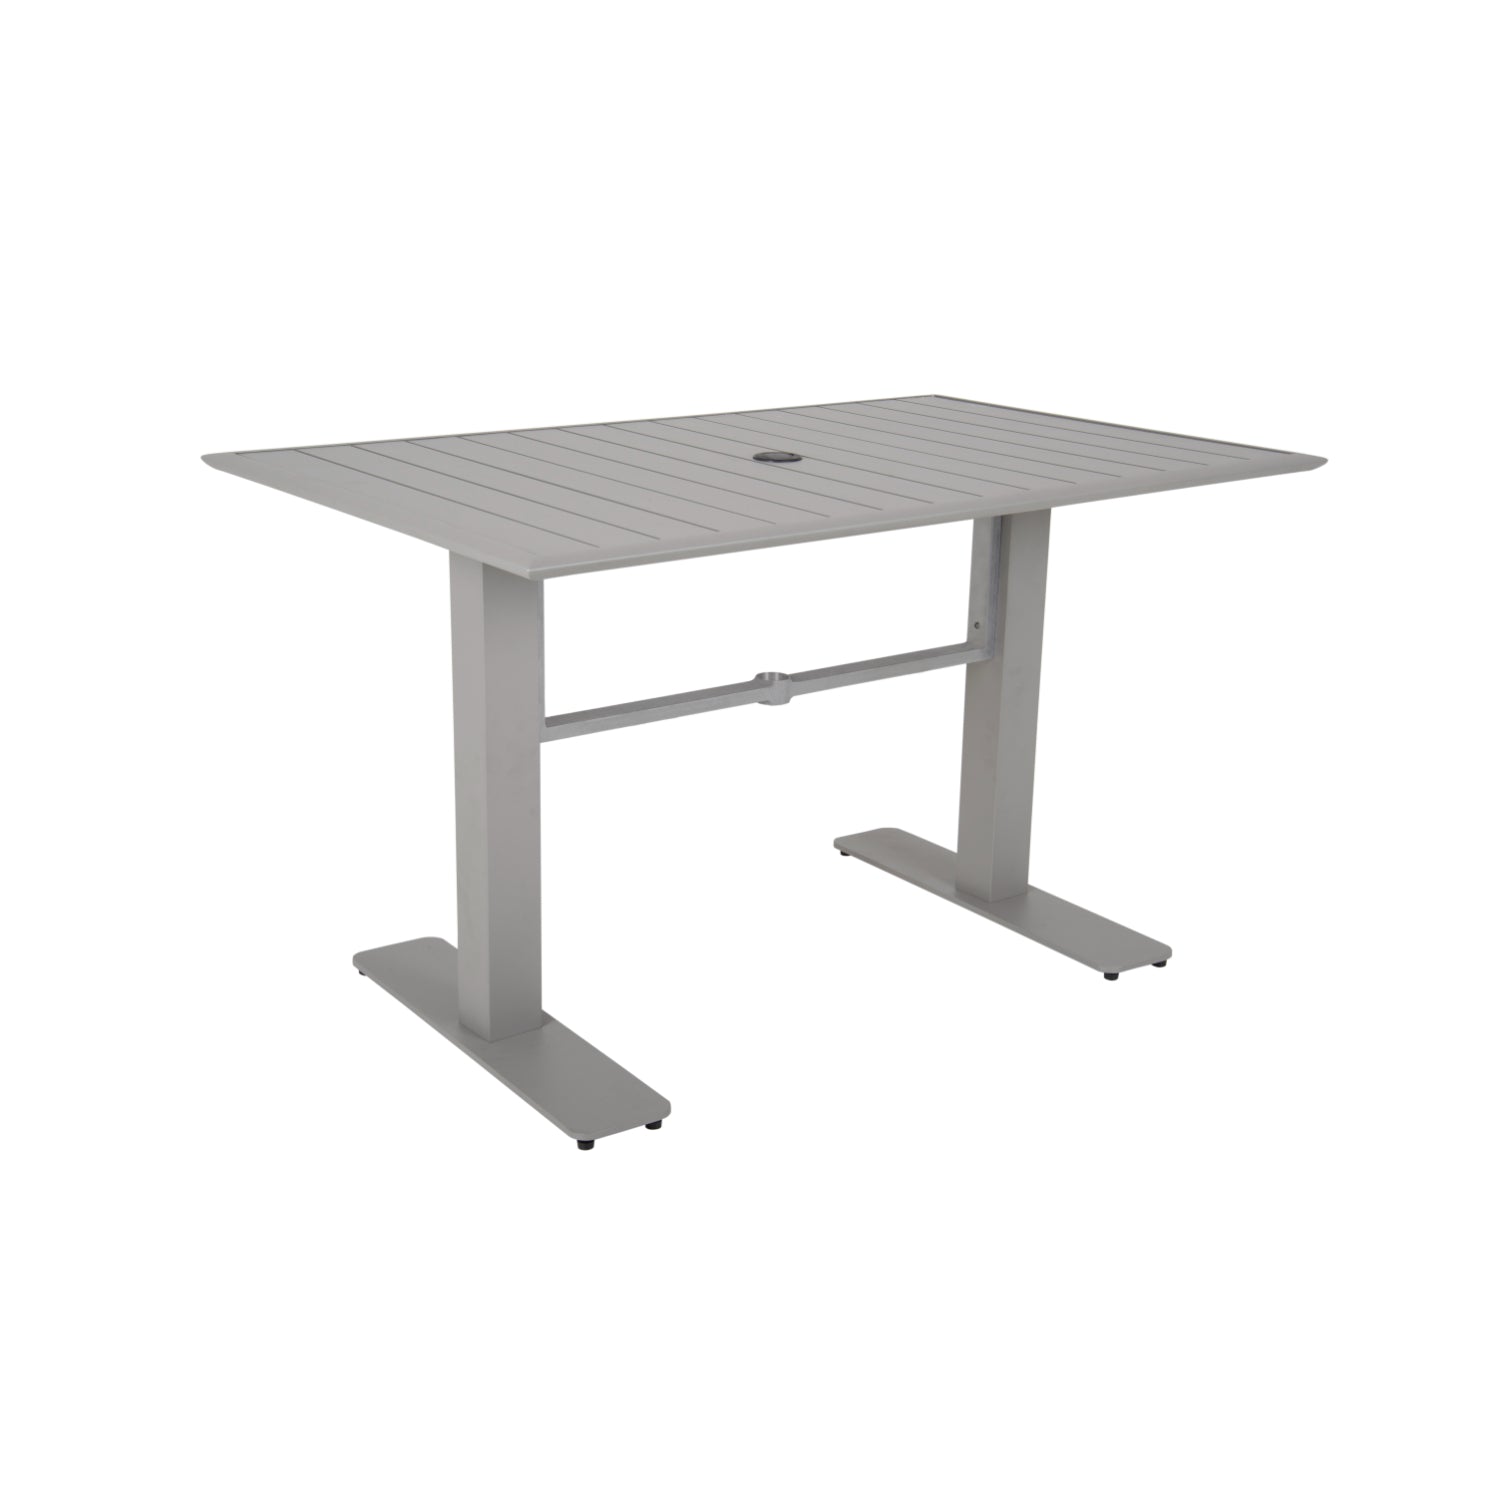 South Beach Collection Outdoor/Indoor 32" x 48" Titanium Silver Aluminum Dining Height Table with Umbrella Hole